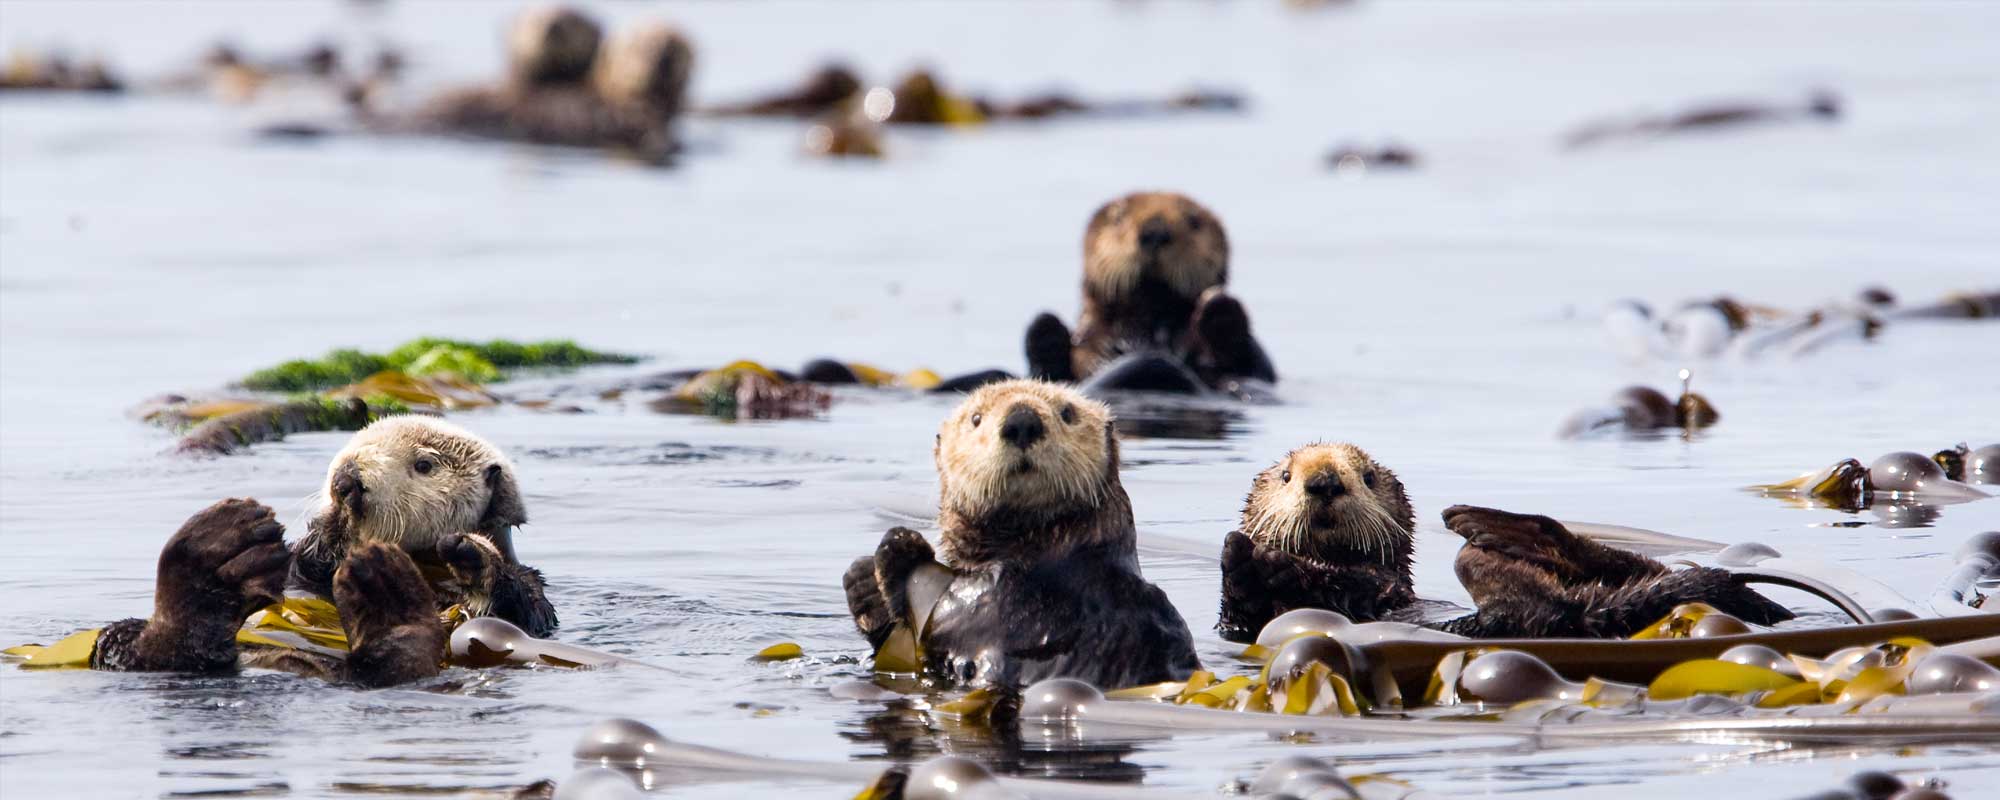 Kayaking with Sea Otters Tour Overview | Vancouver Island